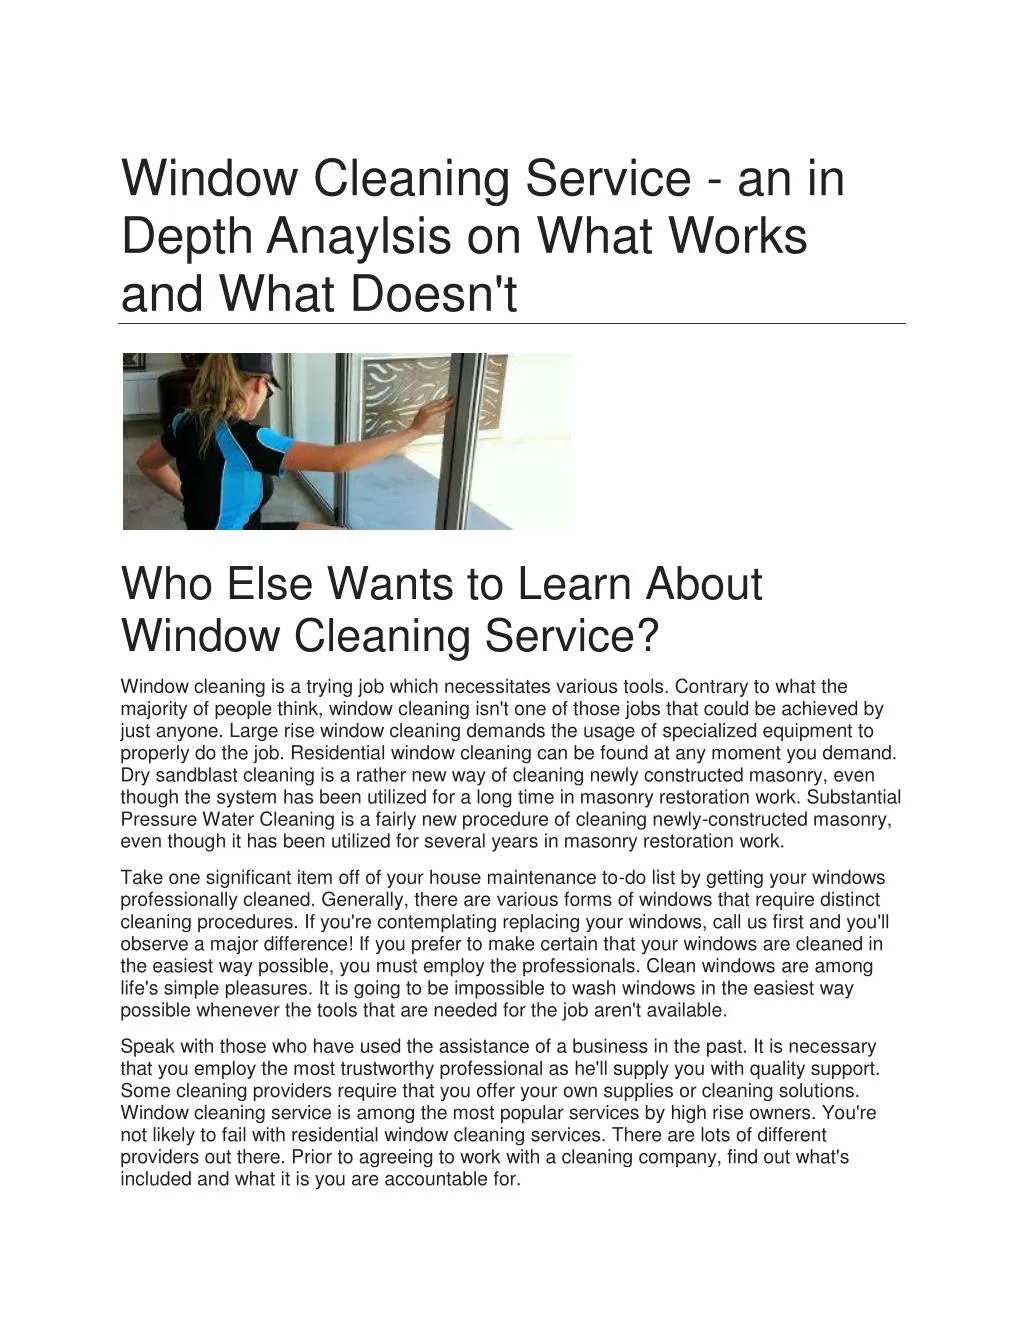 window cleaning service an in depth anaylsis